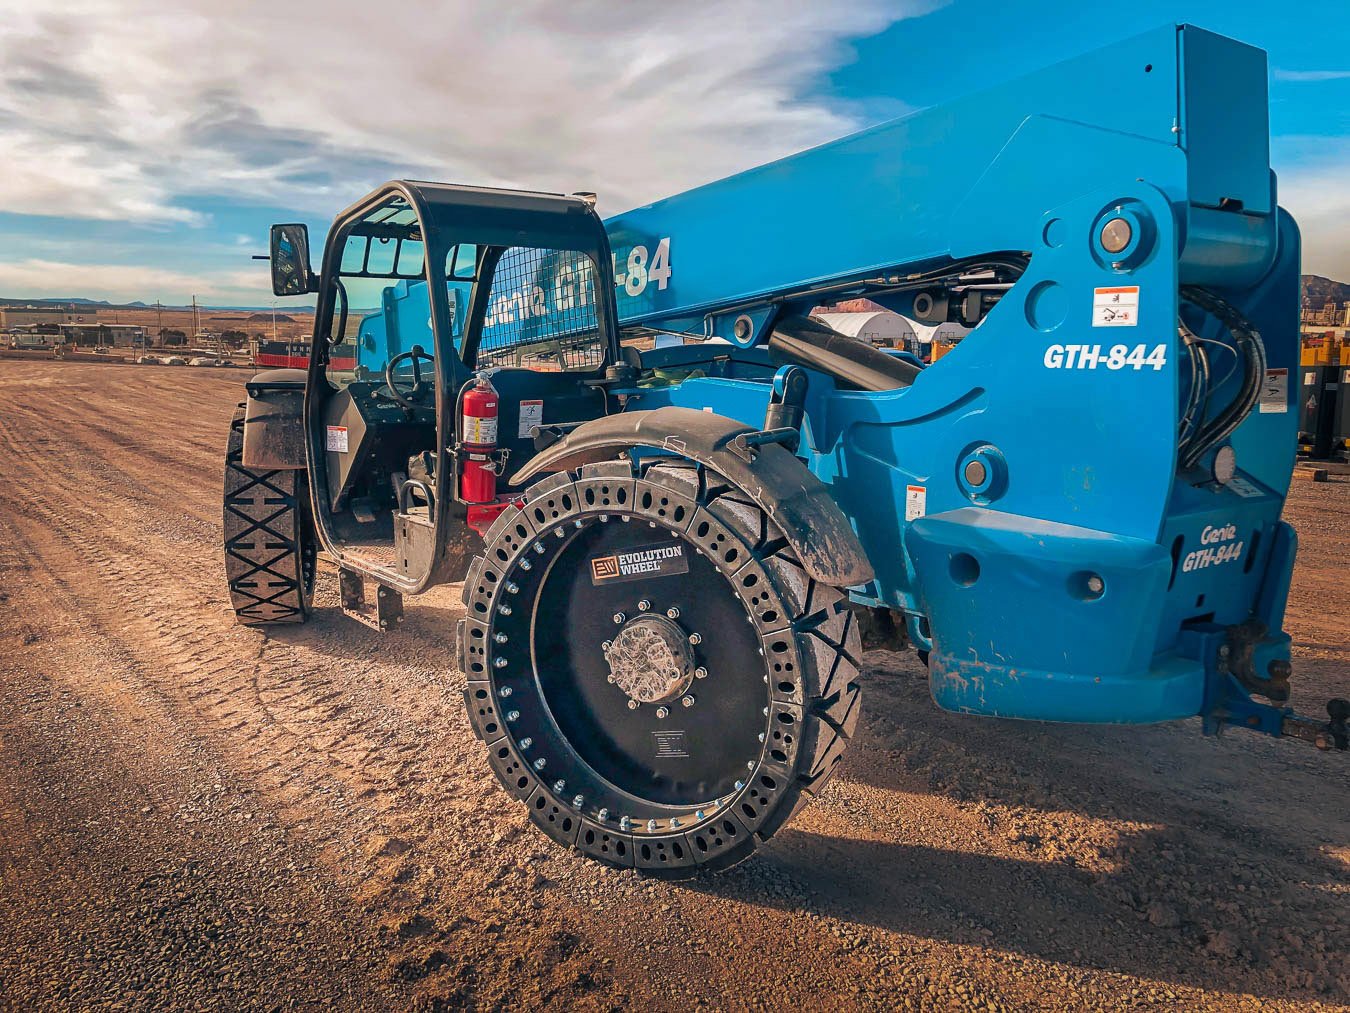 This image shows solid telehandler tires for a blue Genie telehandler.